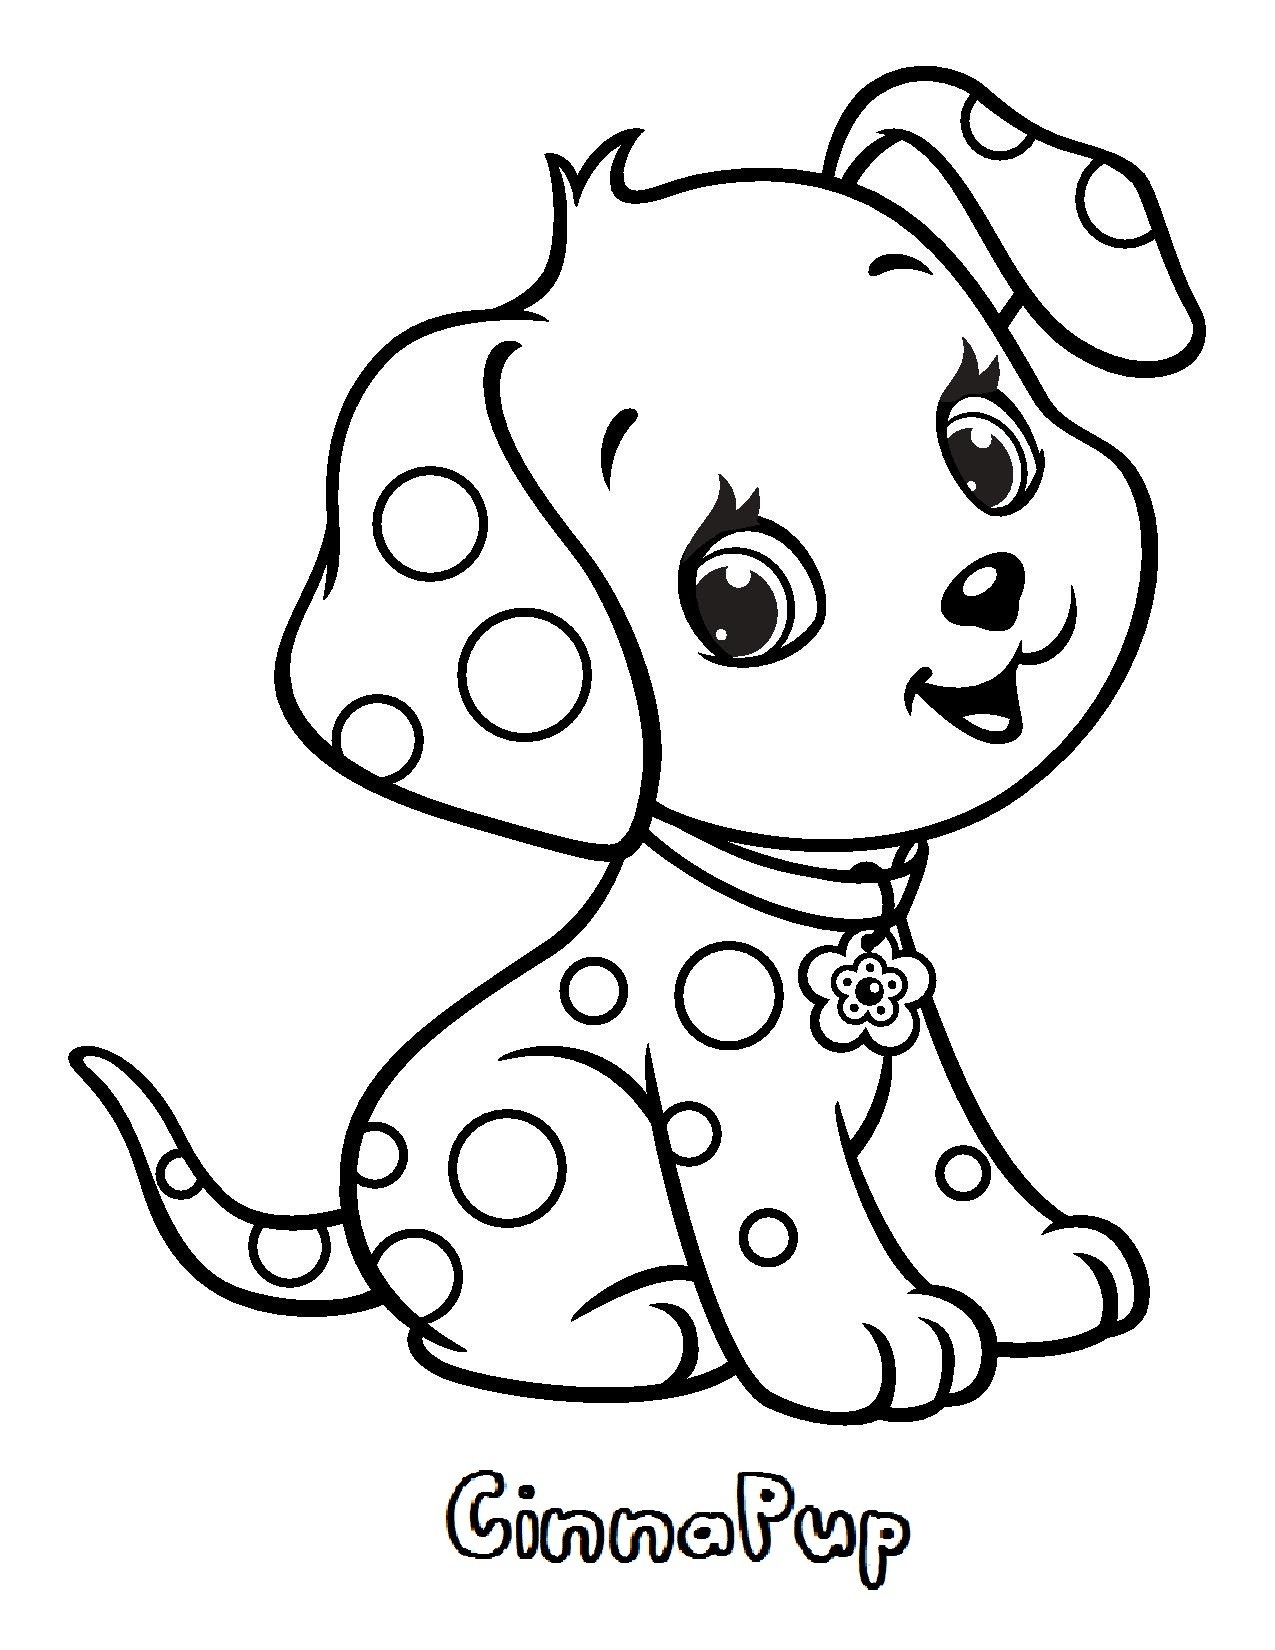 Dog Coloring Pages   Free Printable Coloring Pages for Kids